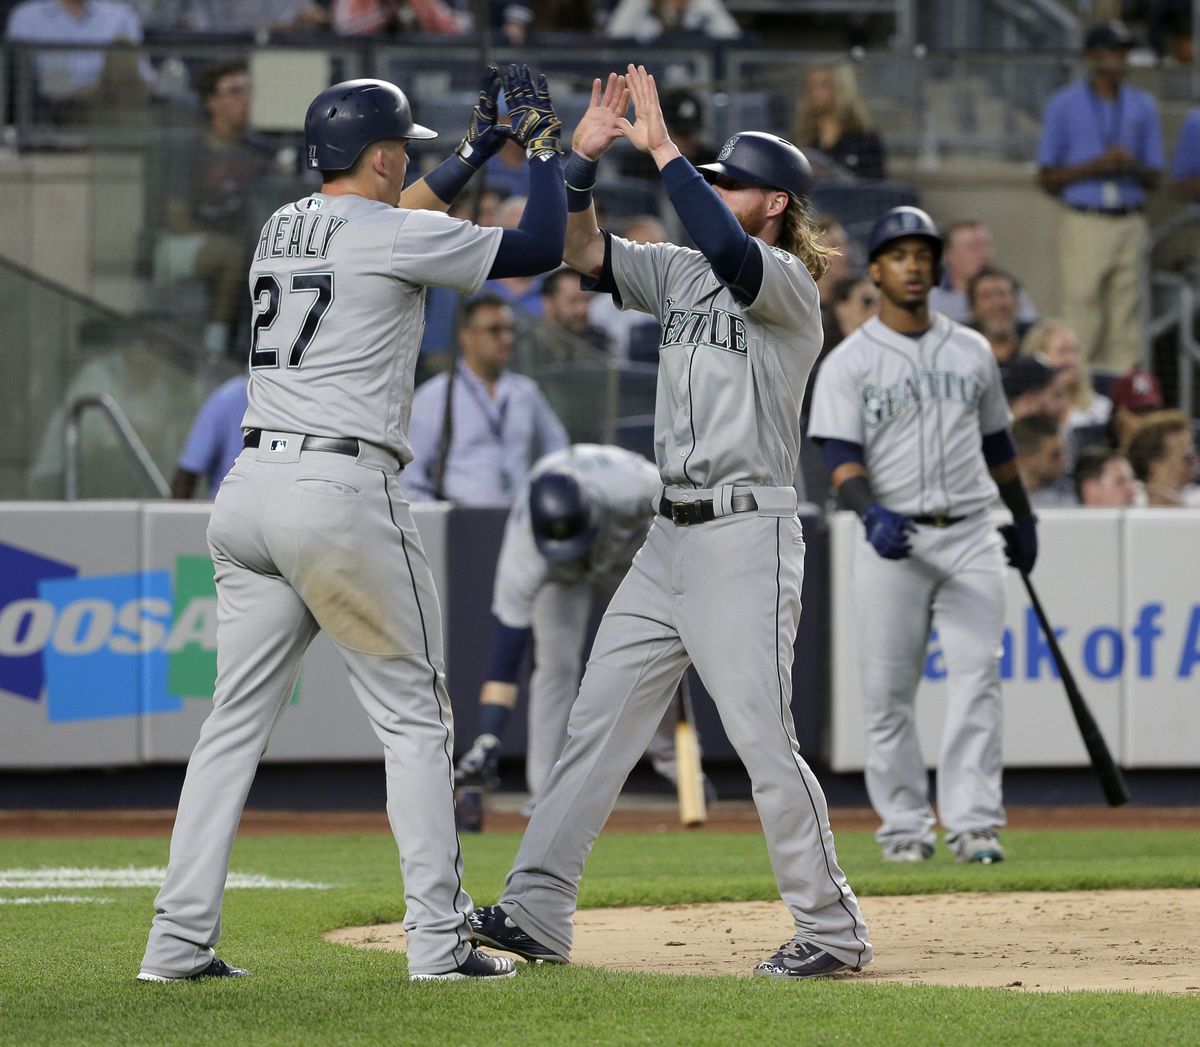 Giancarlo Stanton hits another home run as NY Yankees beat Mariners